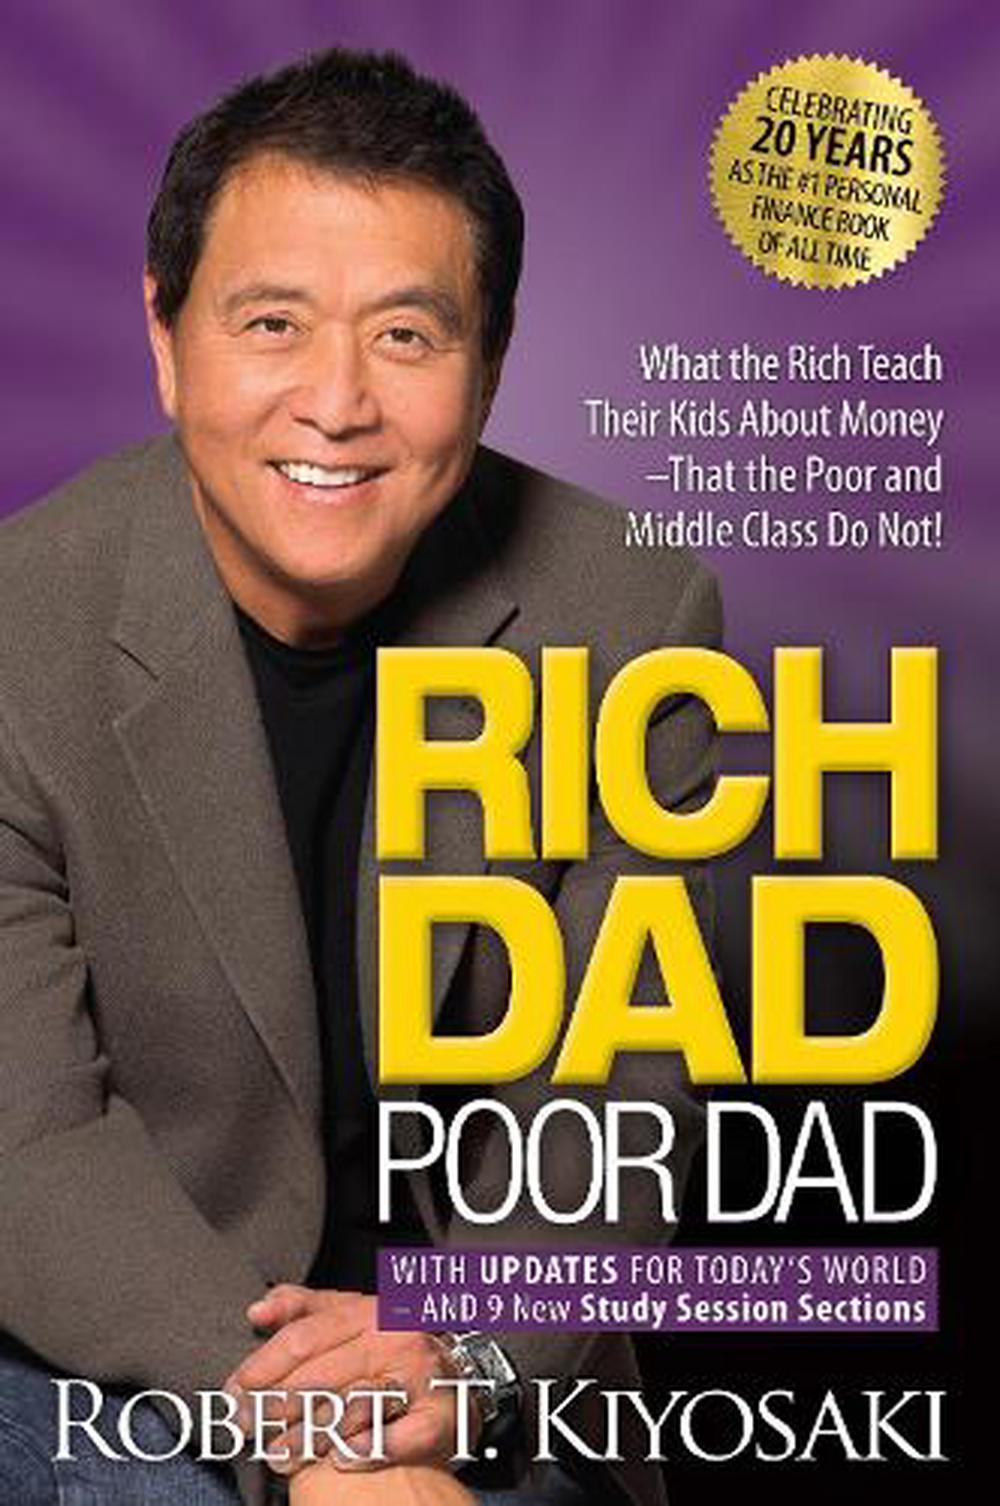 book review of rich dad and poor dad